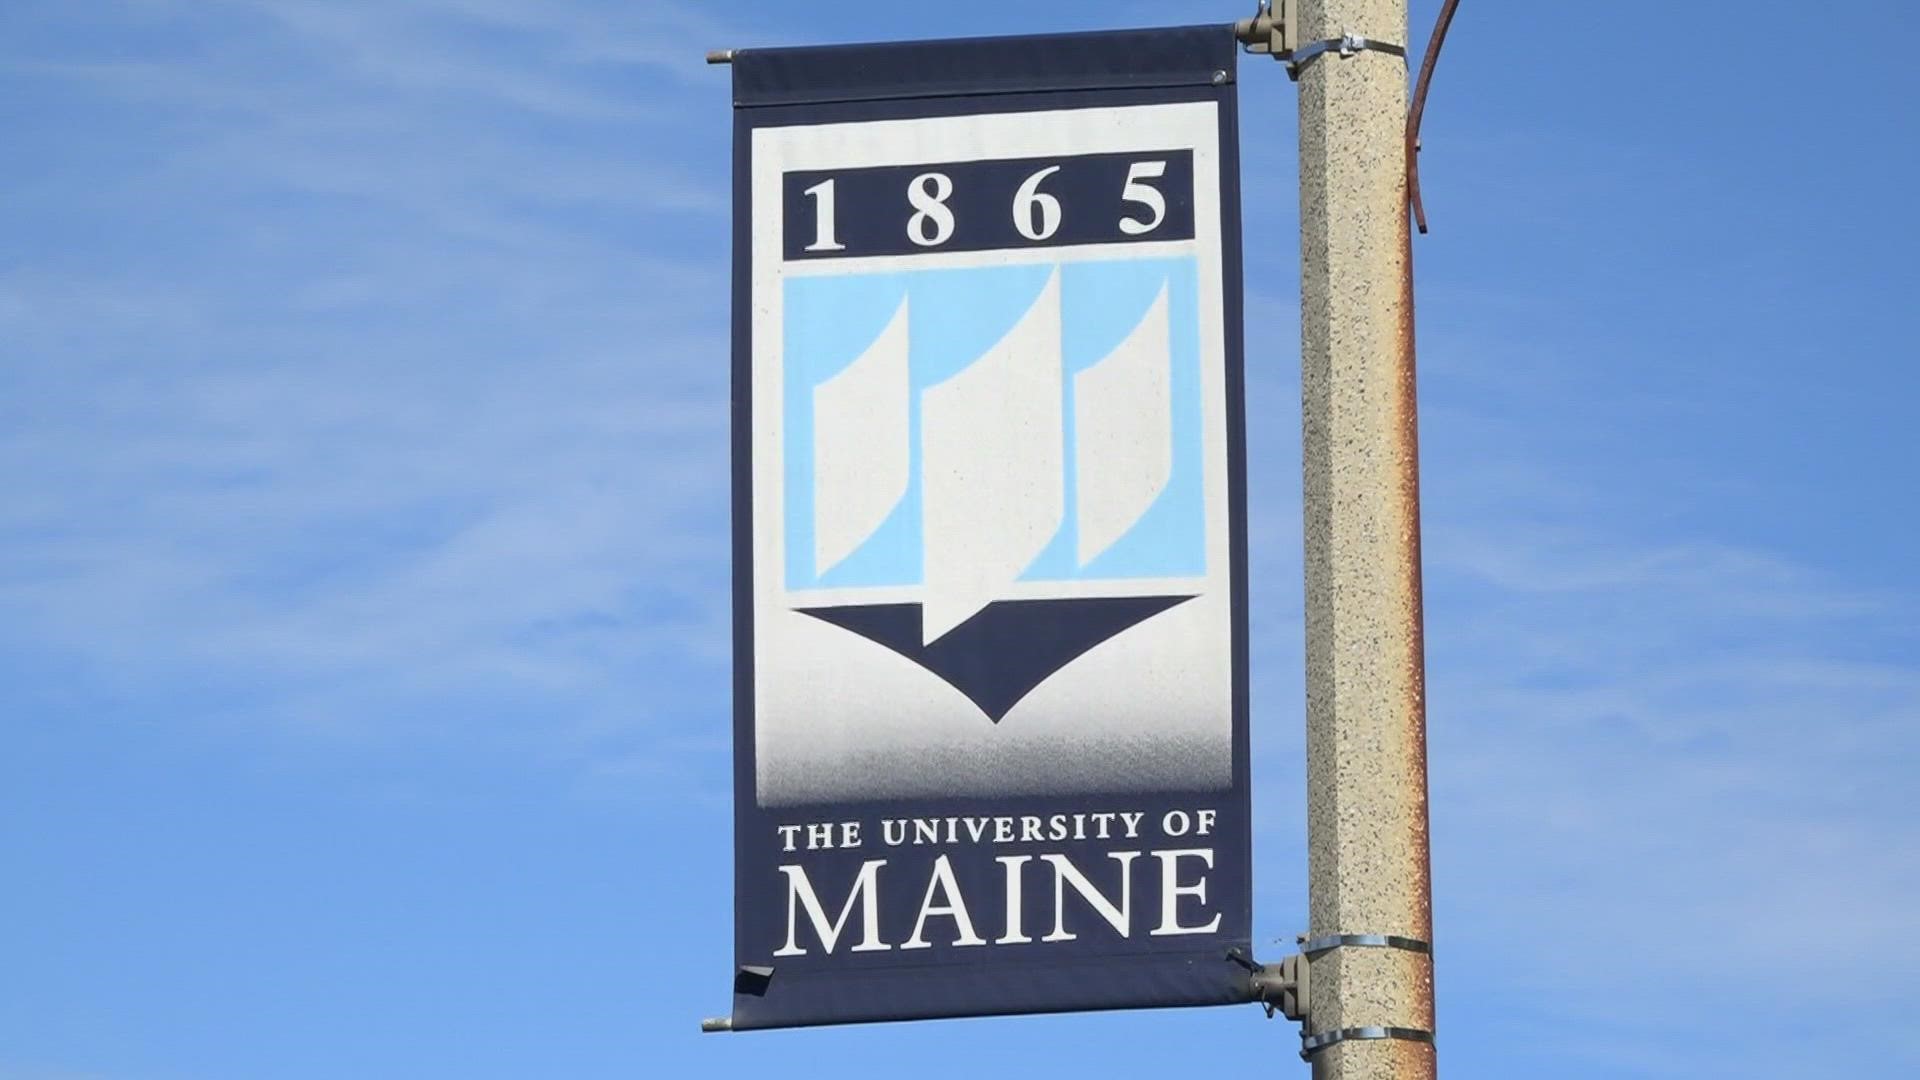 Through AP courses at UMaine's Early College Program, one student has jump-started his college career.